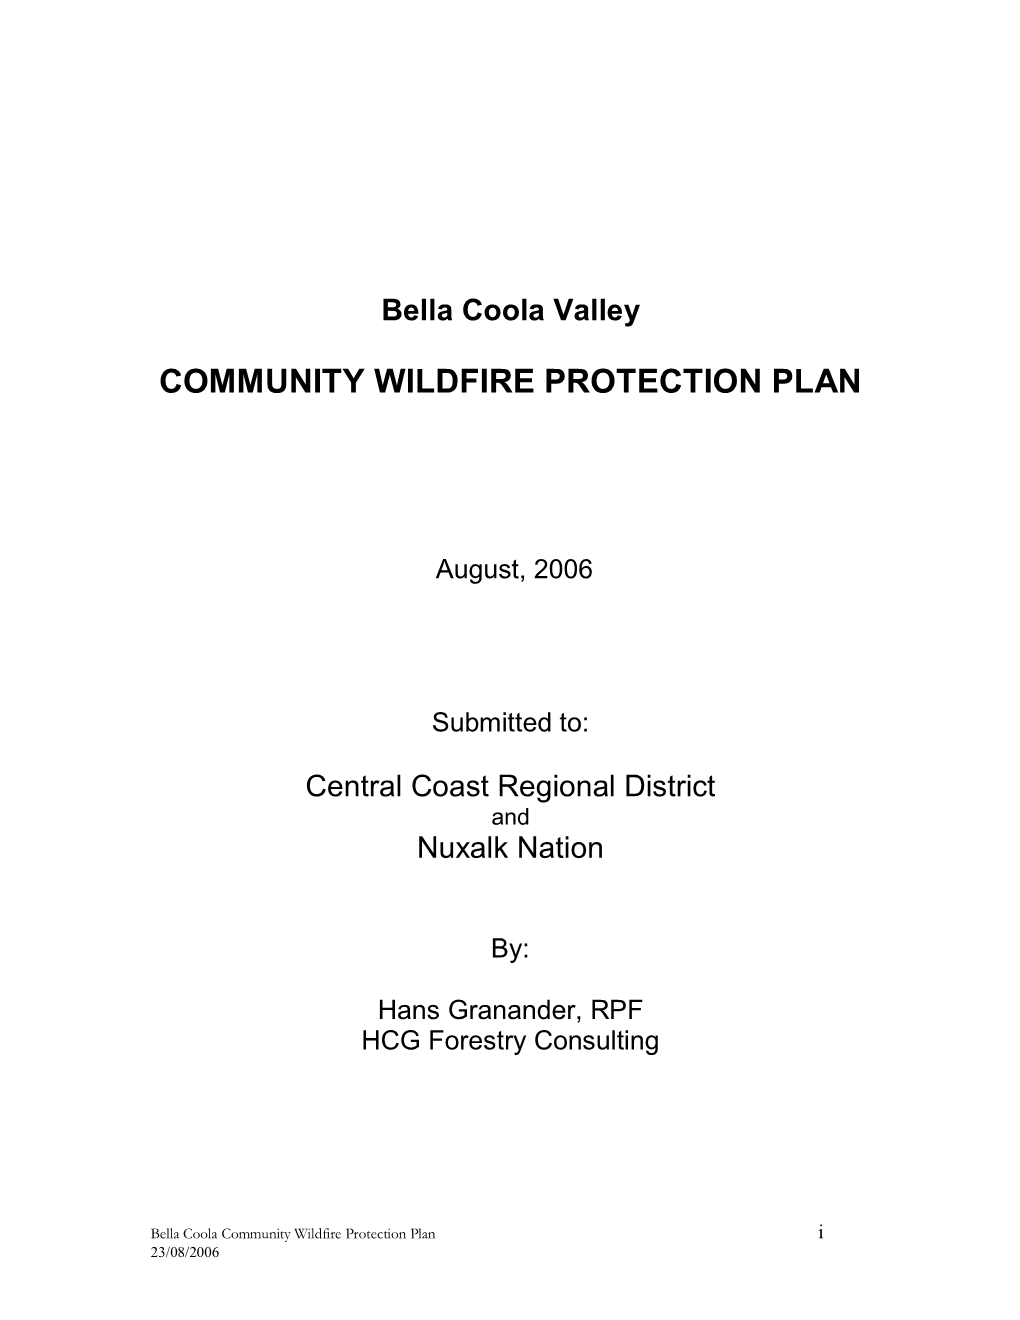 Bella Coola Community Wildfire Protection Plan I 23/08/2006 Wildfire Emergency Contacts